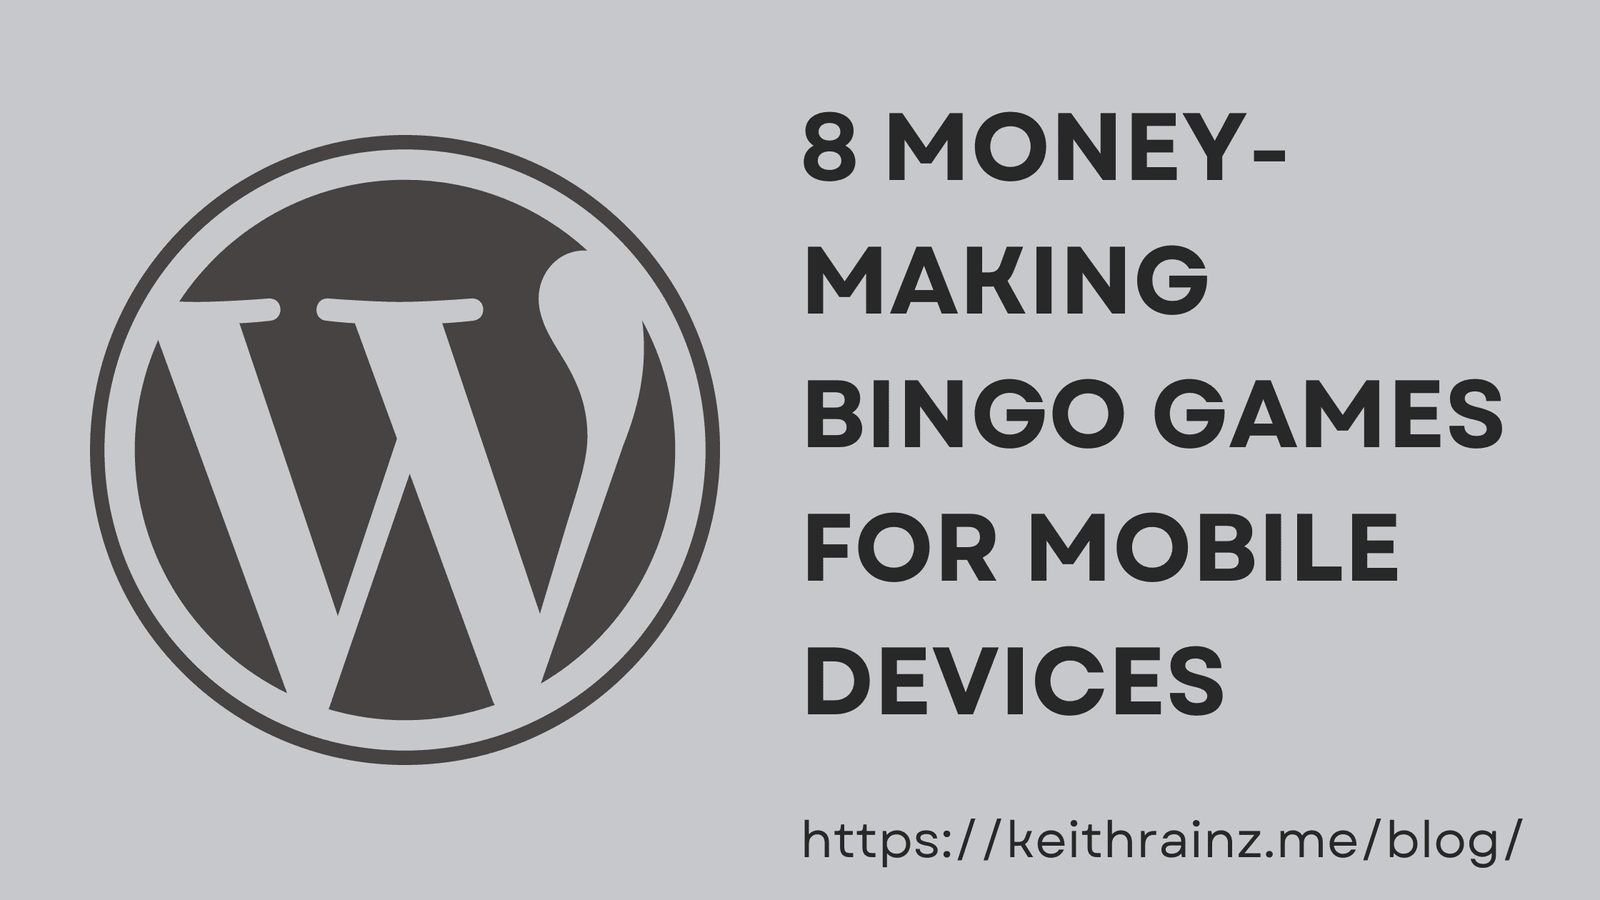 8 Money-Making Bingo Games For Mobile Devices